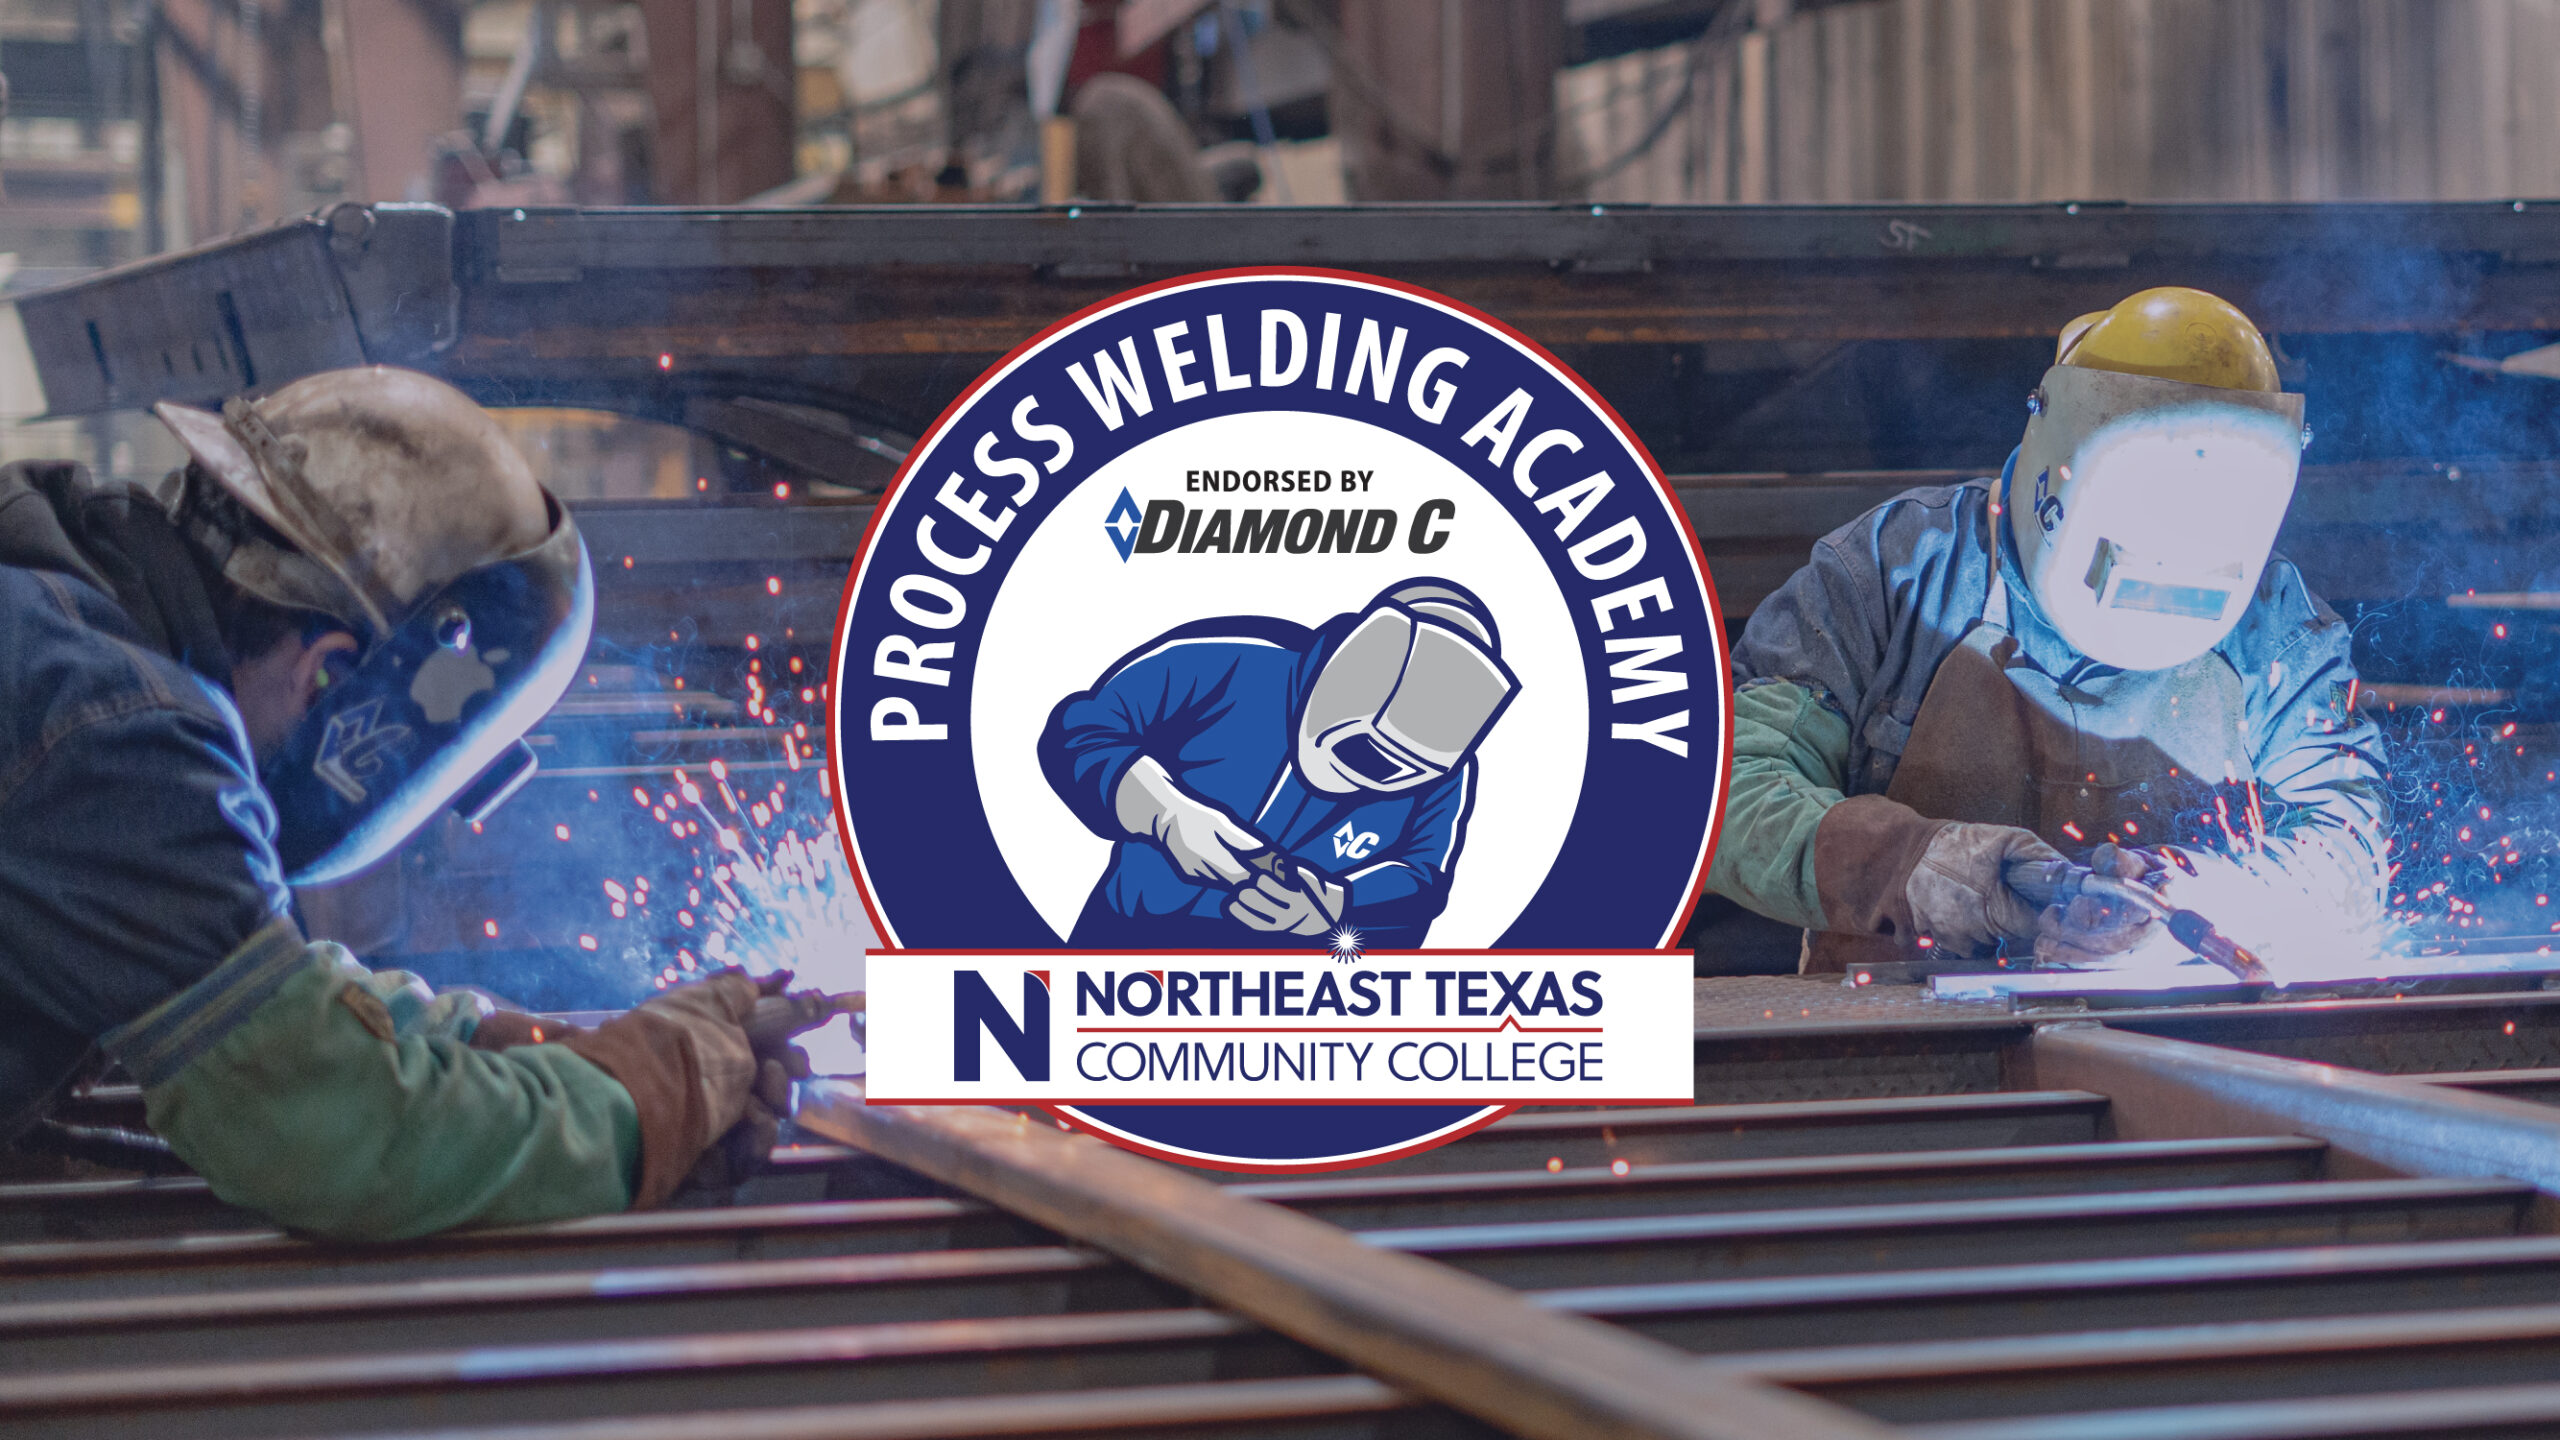 Northeast Texas Community College Process Welding Academy endorsed by Diamond C Trailers.